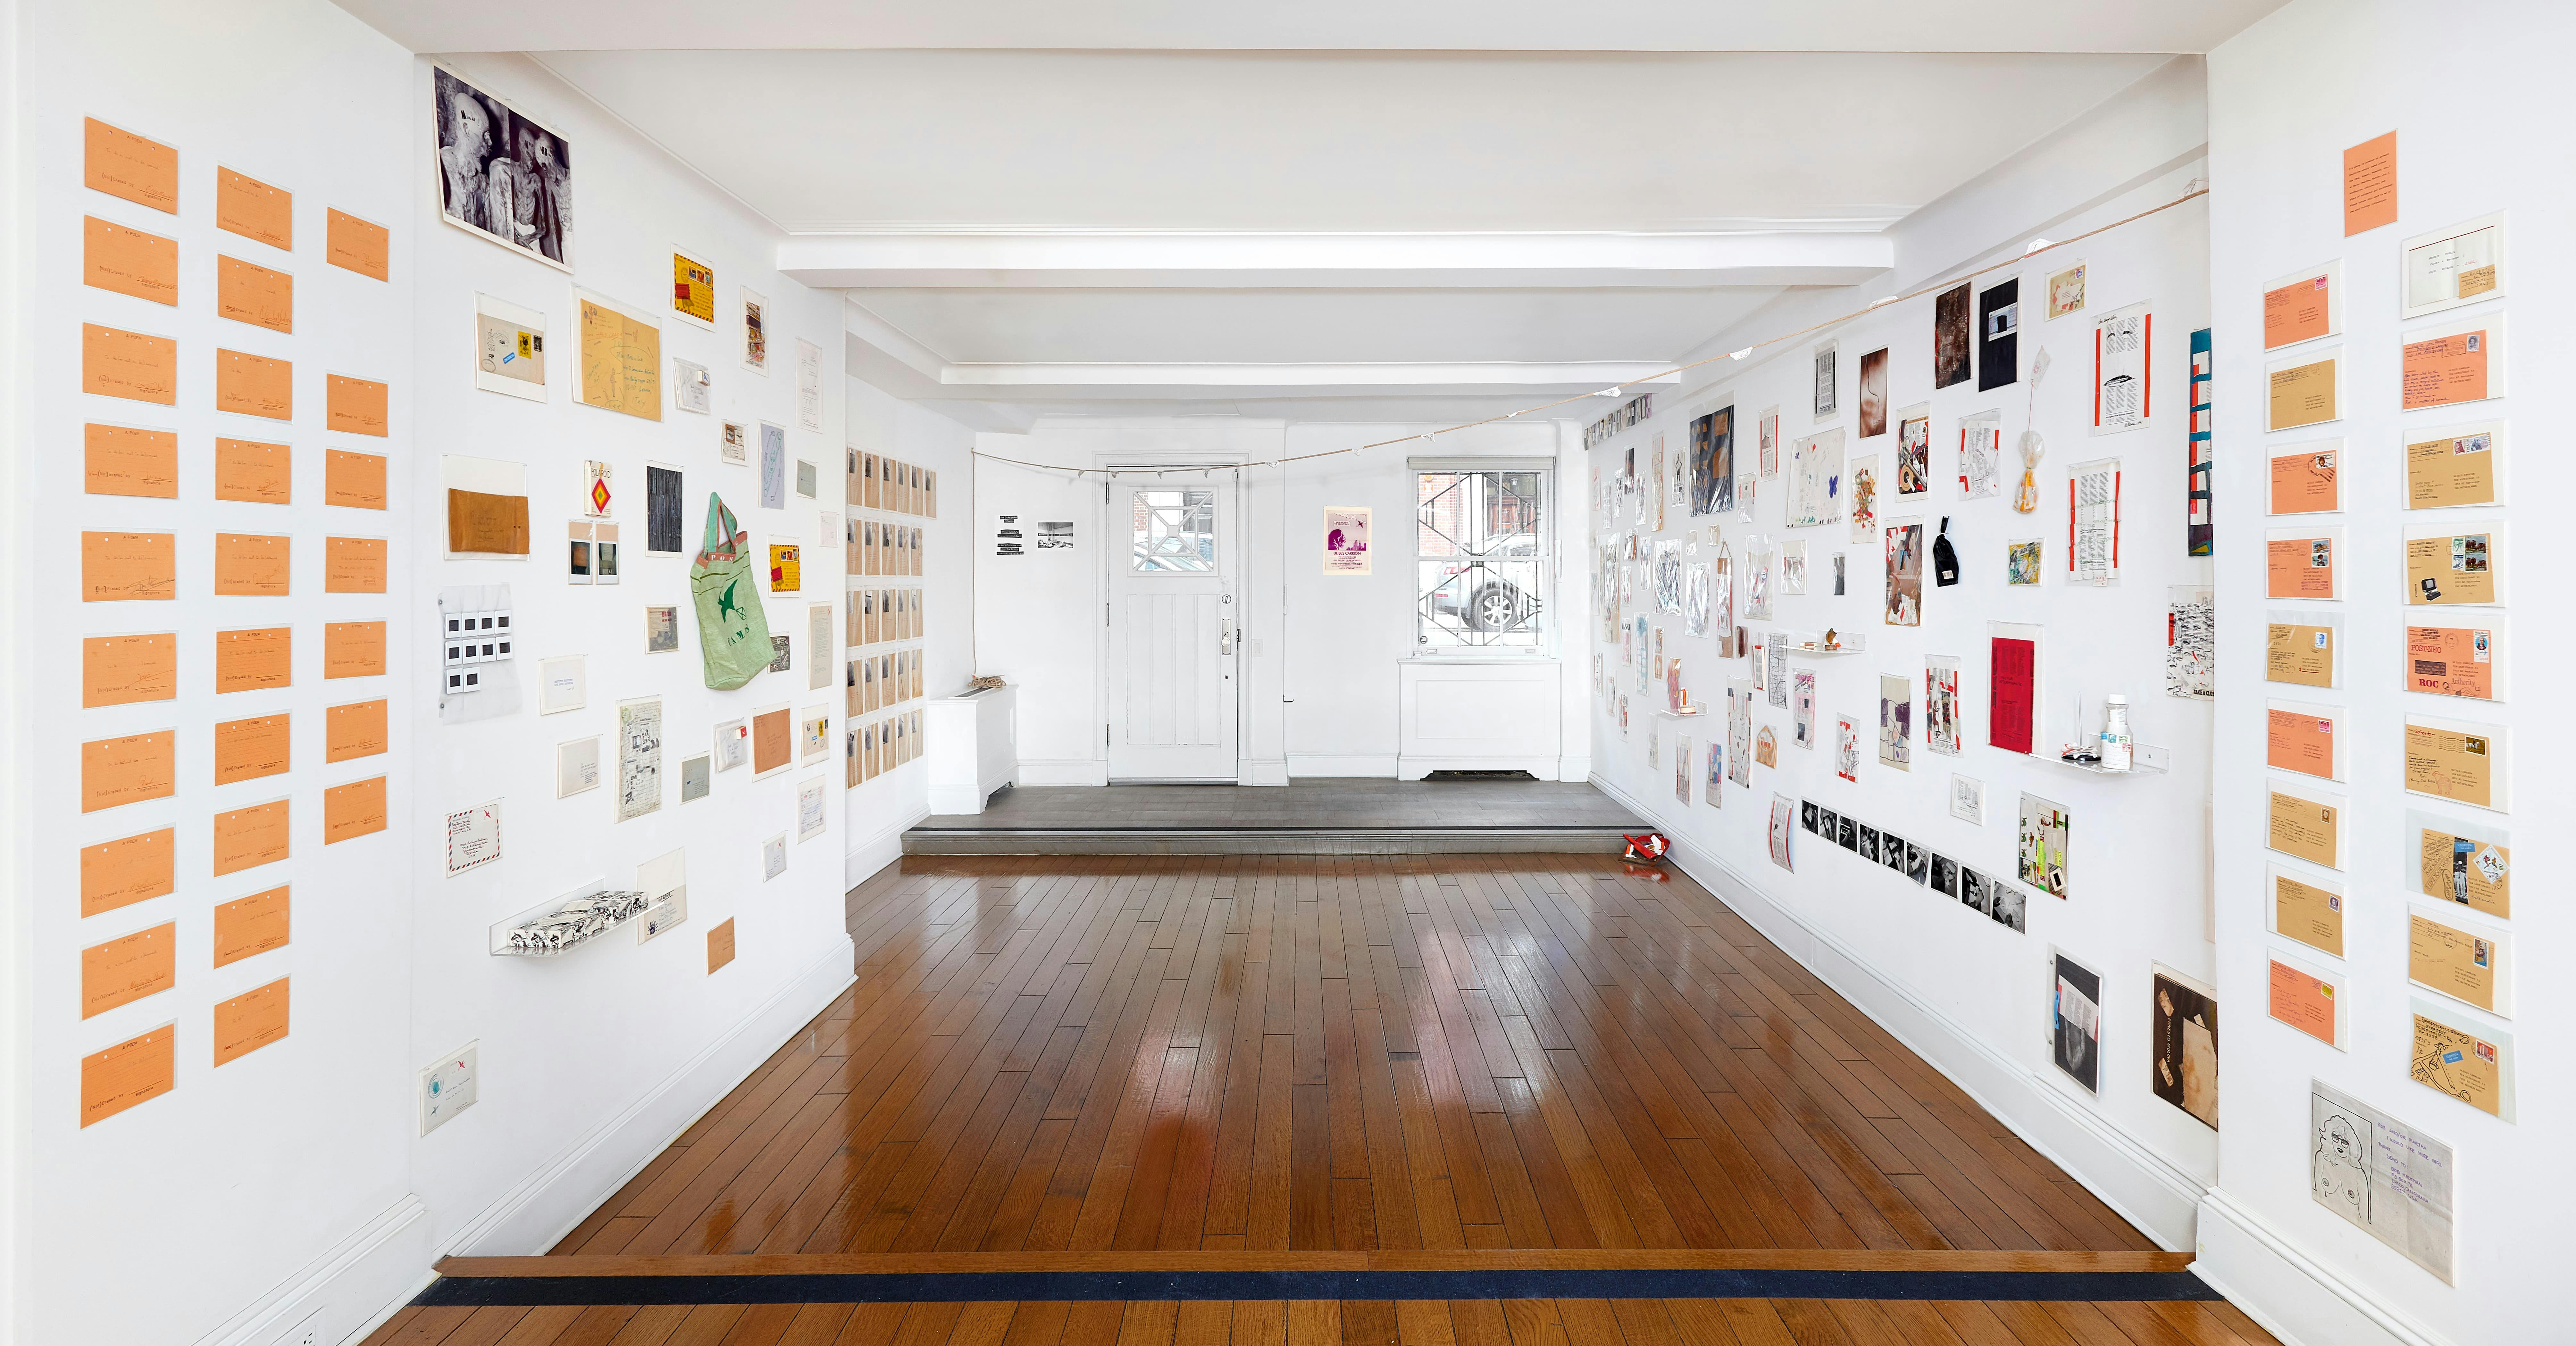 Installation view of Ulises Carrión: The Big Monster exhibition showing envelopes, photographs, and various objects mounted to the gallery walls.